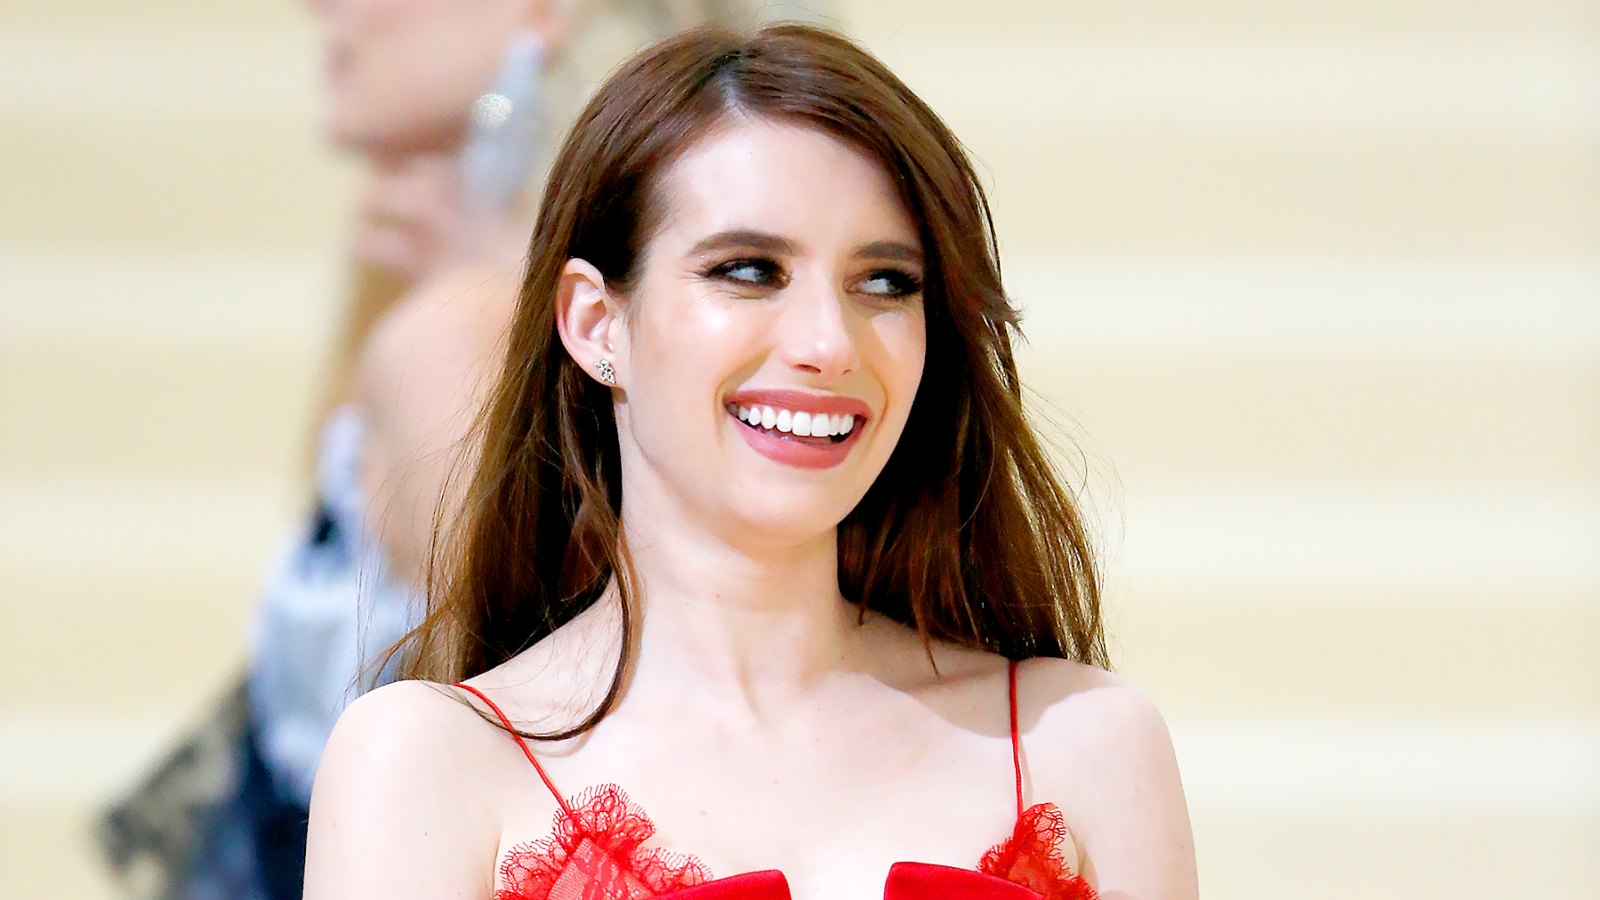 Emma Roberts attends "Rei Kawakubo/Comme des Garcons: Art Of The In-Between" Costume Institute Gala - O at Metropolitan Museum of Art on May 1, 2017 in New York City.